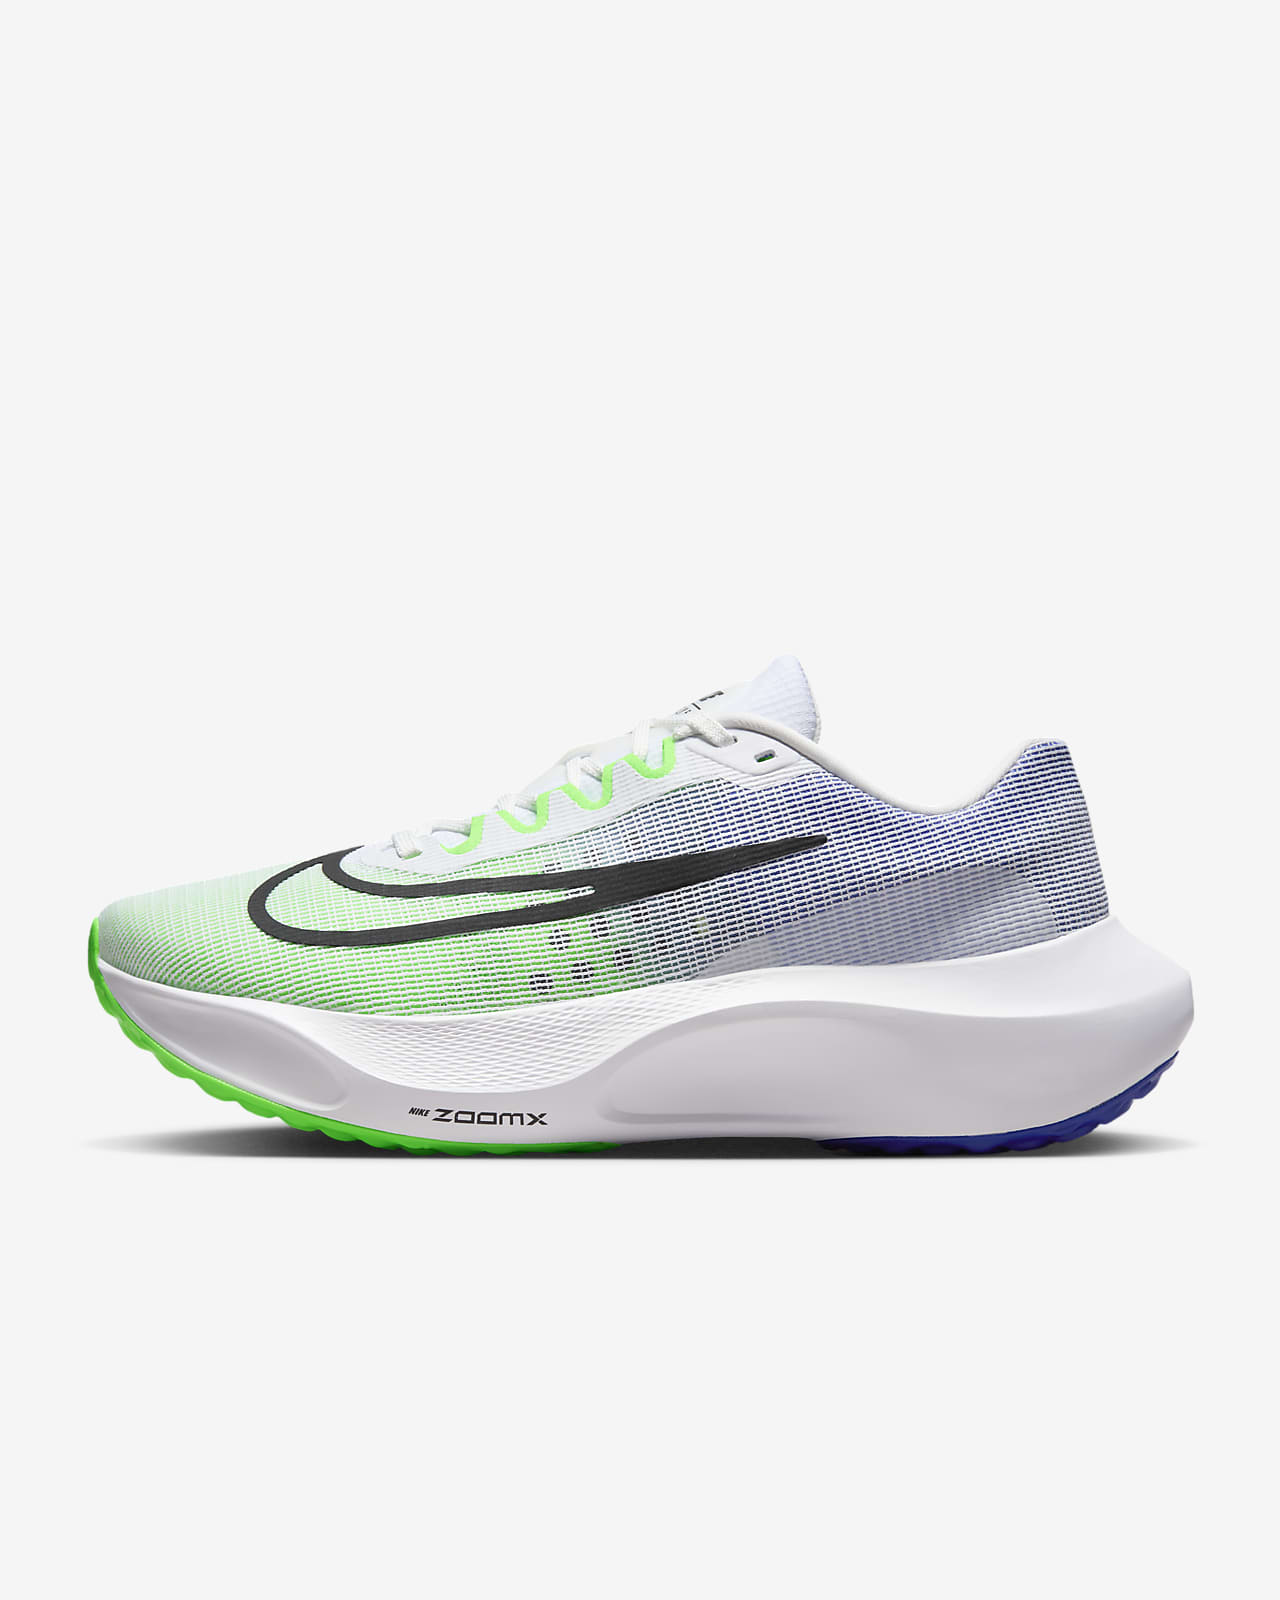 Nike Zoom Fly 4 Review: Legit Carbon Plated Trainer or Not?